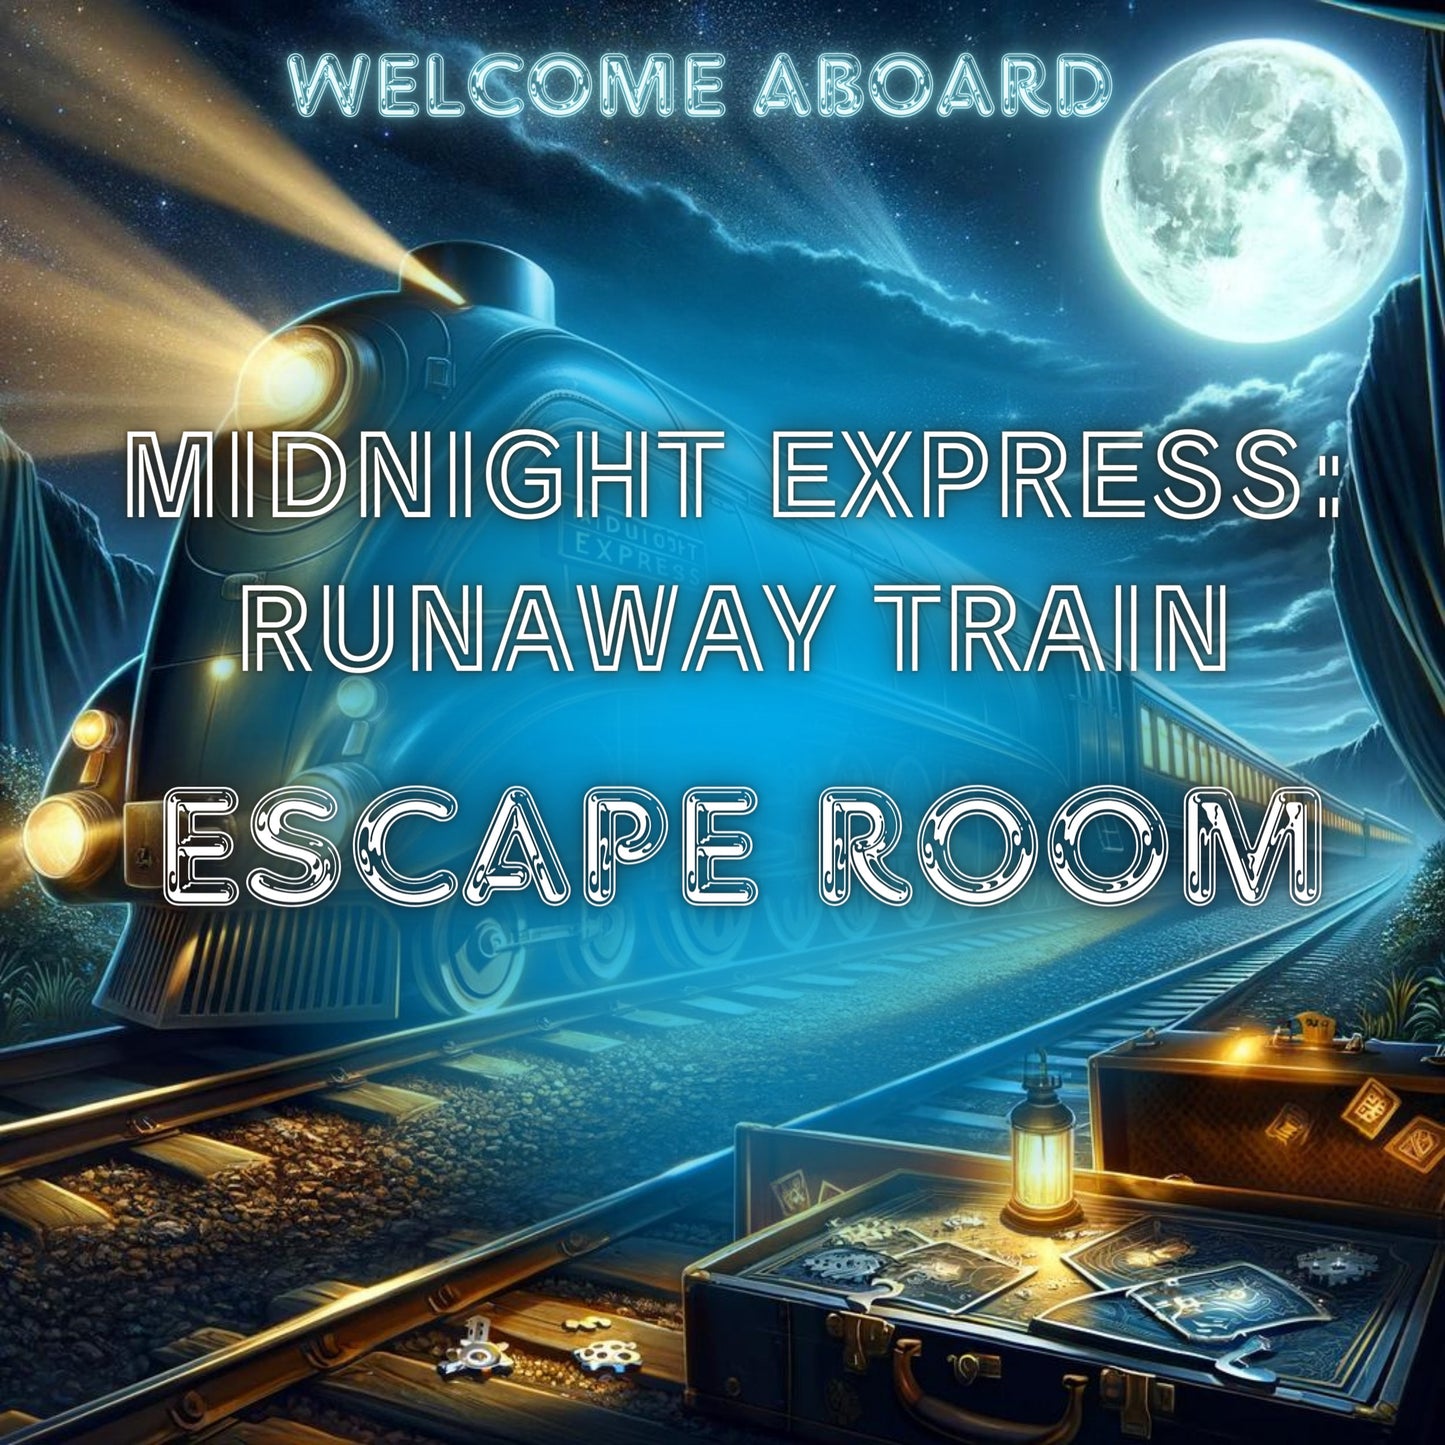 Midnight Express Runaway Train Escape Room Family Friendly Adventure Game Adult Kid Escape Room Instant Download DIY Escape Room Mystery